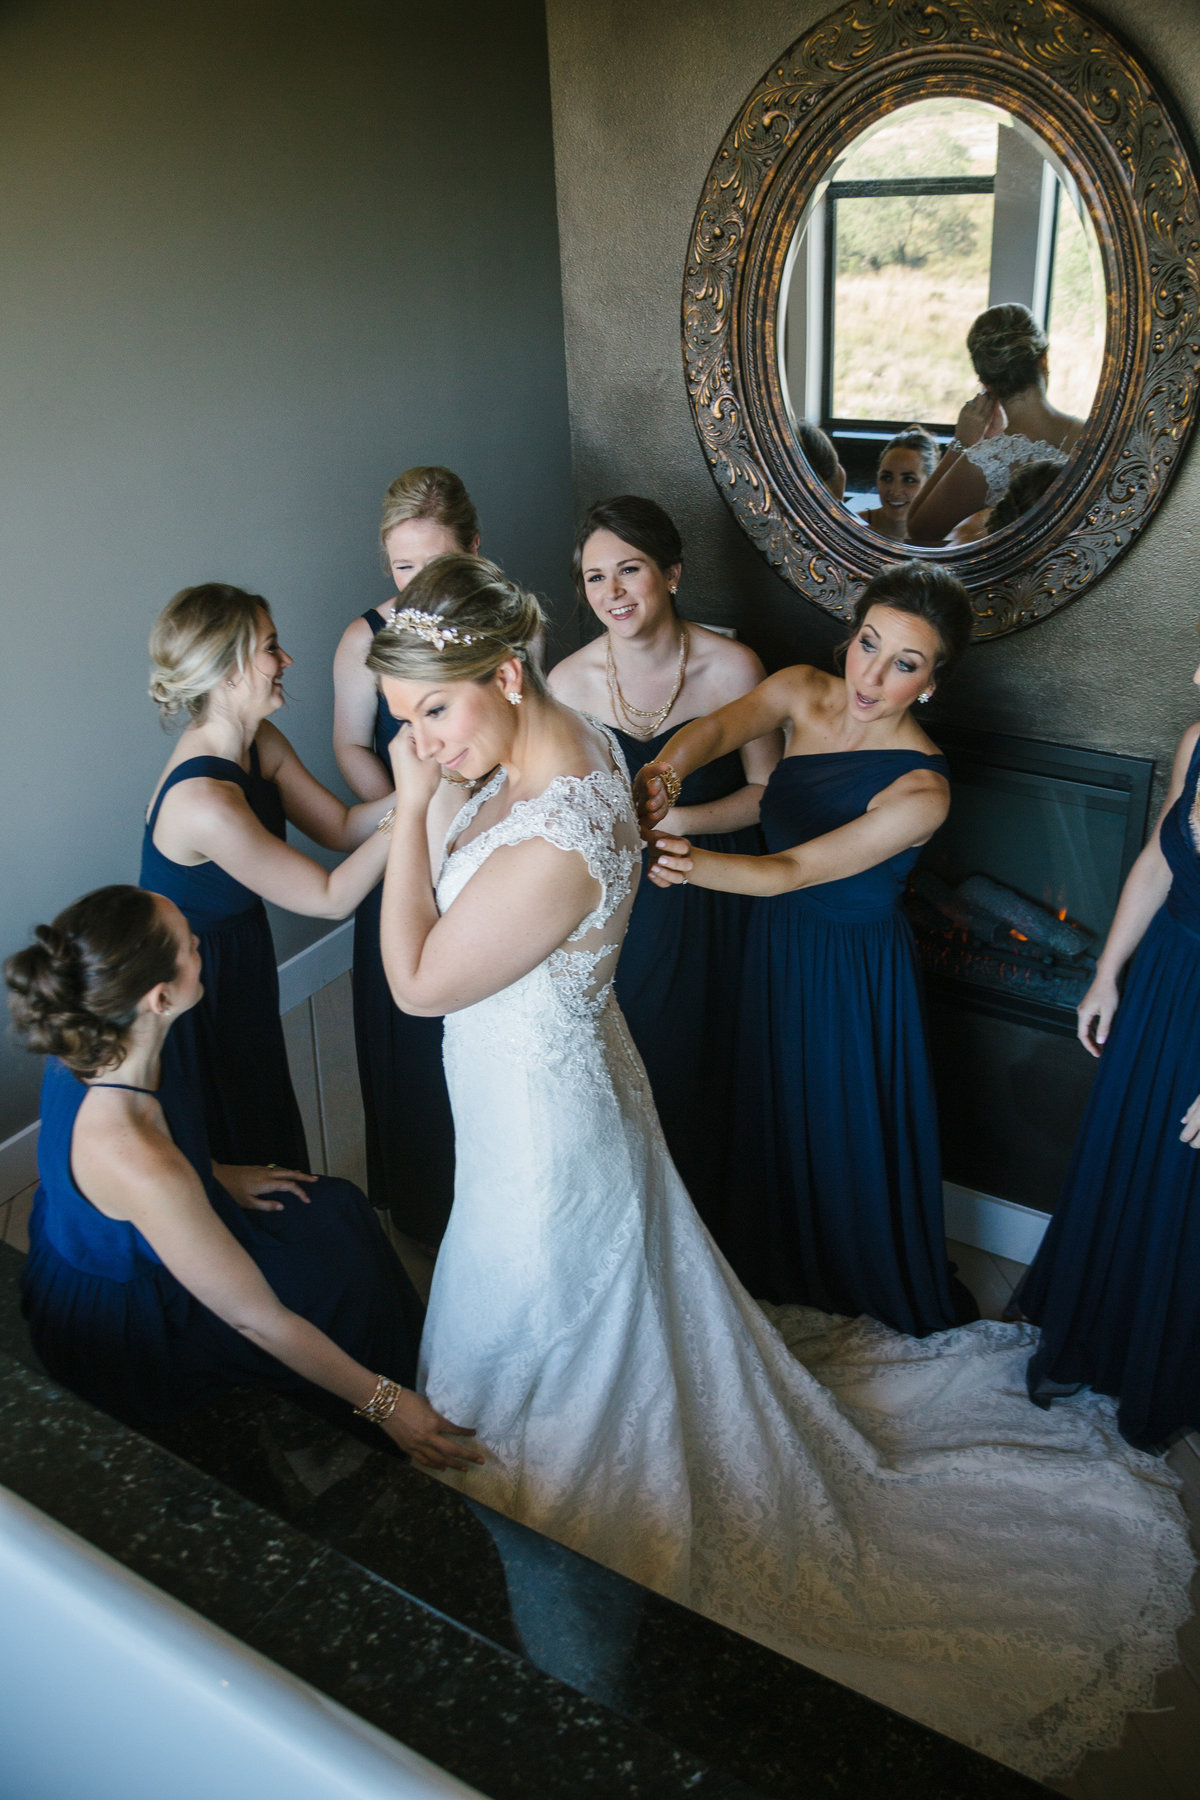 Bride Getting ready at Paniolo Ranch with all her bridesmaids surrounding her just before wedding ceremony.